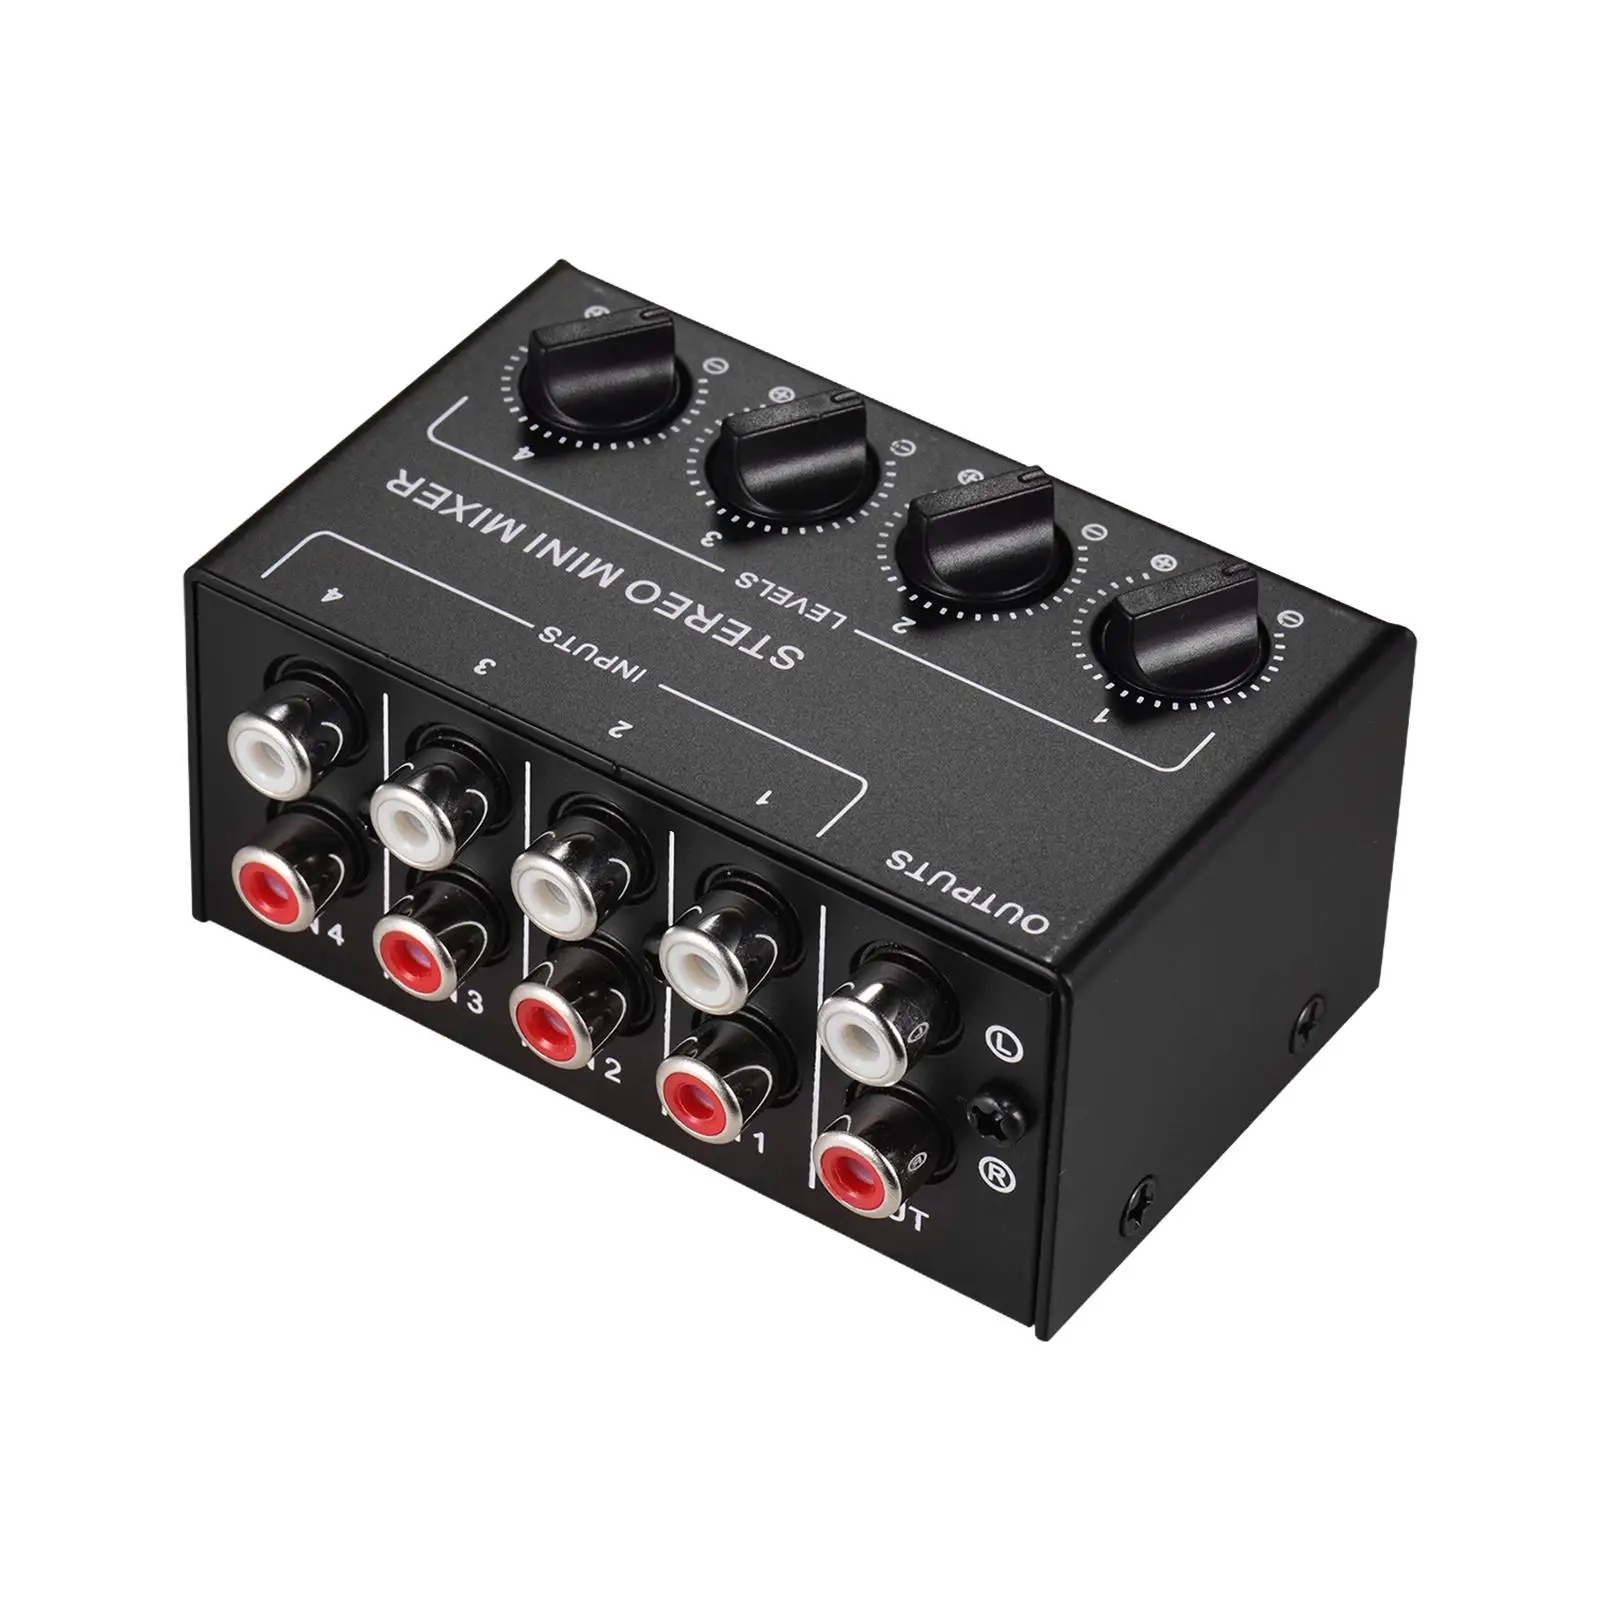 Mini Audio Mixer 4 Channel Small Mixer Stereo Dispenser for Tablet Mobile Phone Studio Stage Live and Studio Mixing Instrument